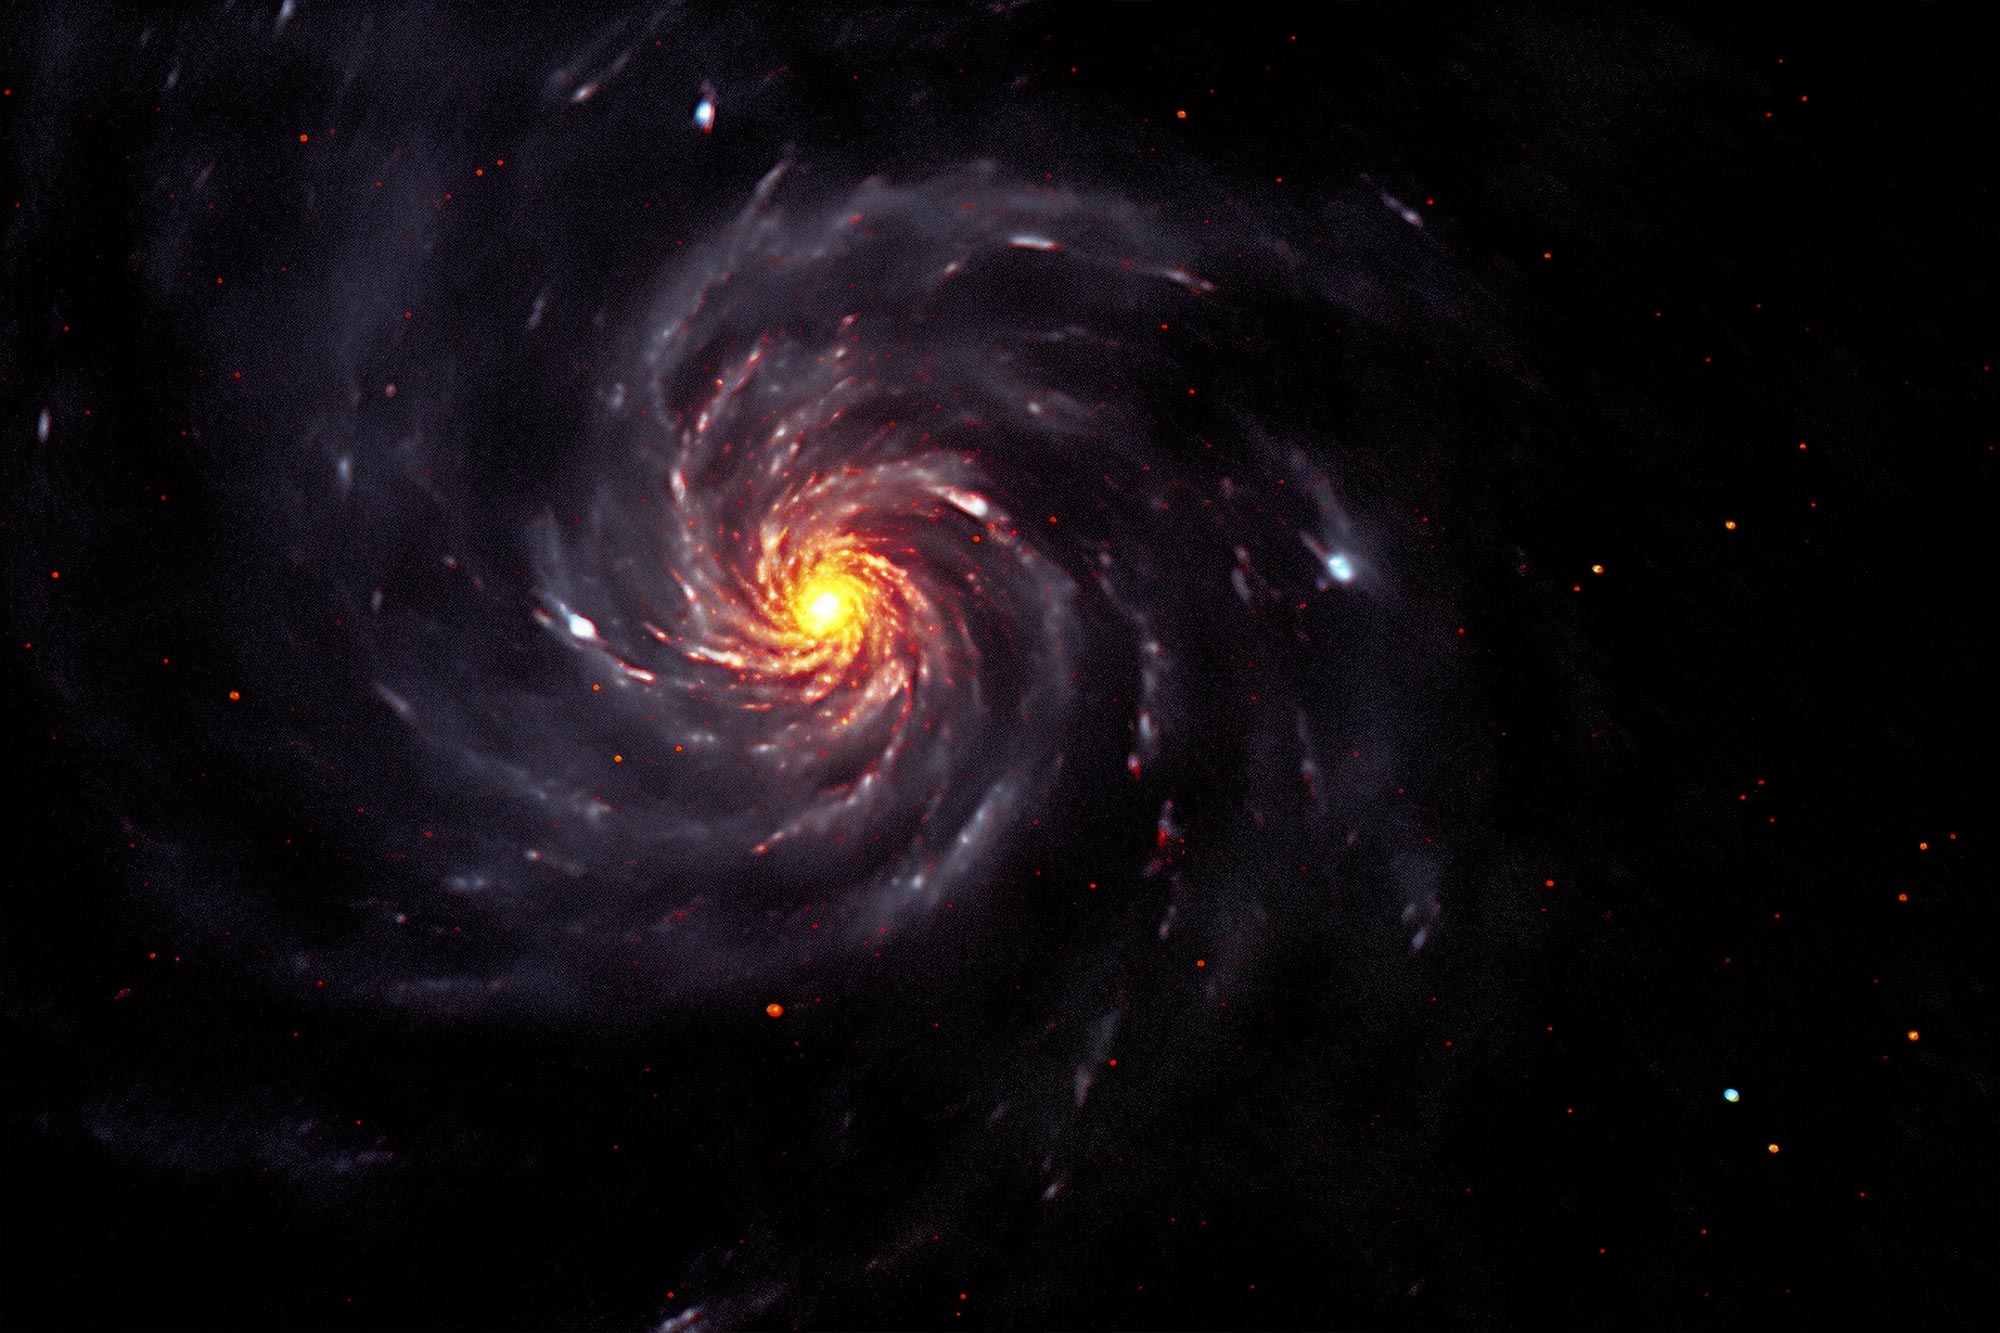 New supernova in the Pinwheel Galaxy now visible with a telescope